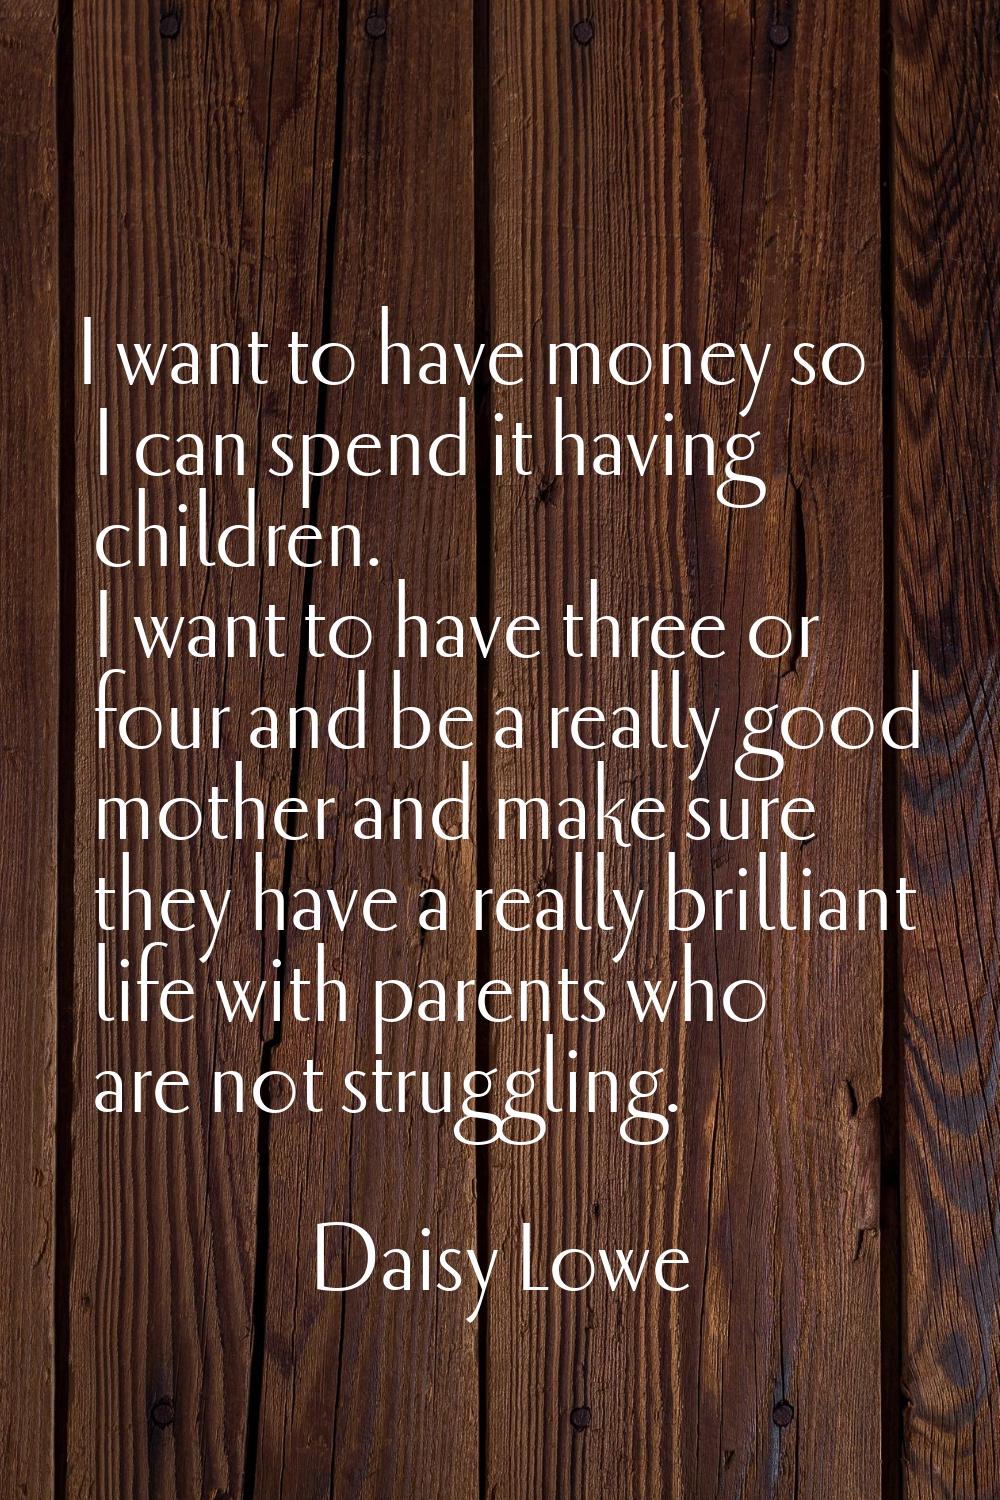 I want to have money so I can spend it having children. I want to have three or four and be a reall